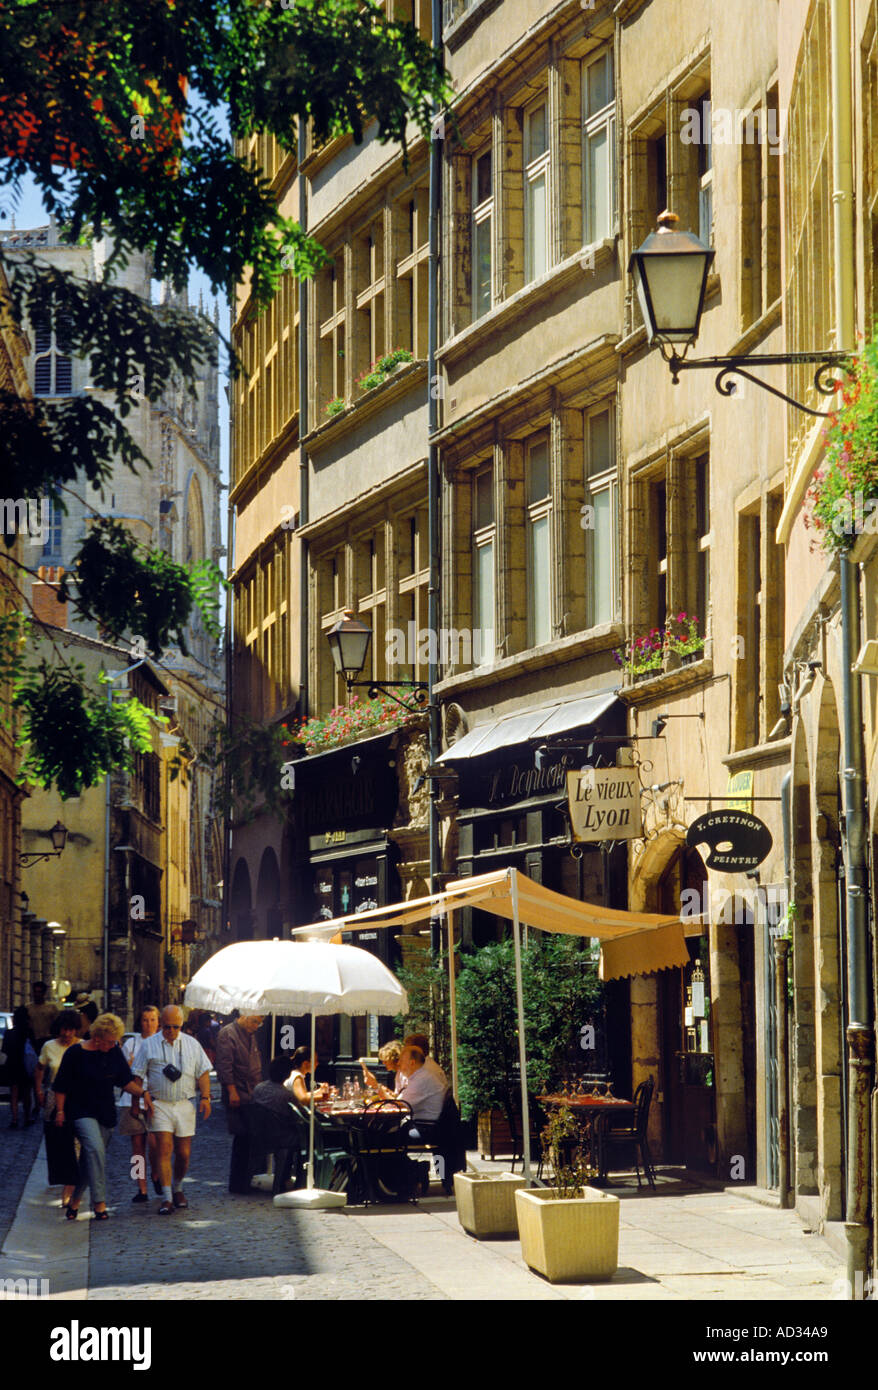 THE RUE ST JEAN IN THE OLD LYON FRANCE Stock Photo